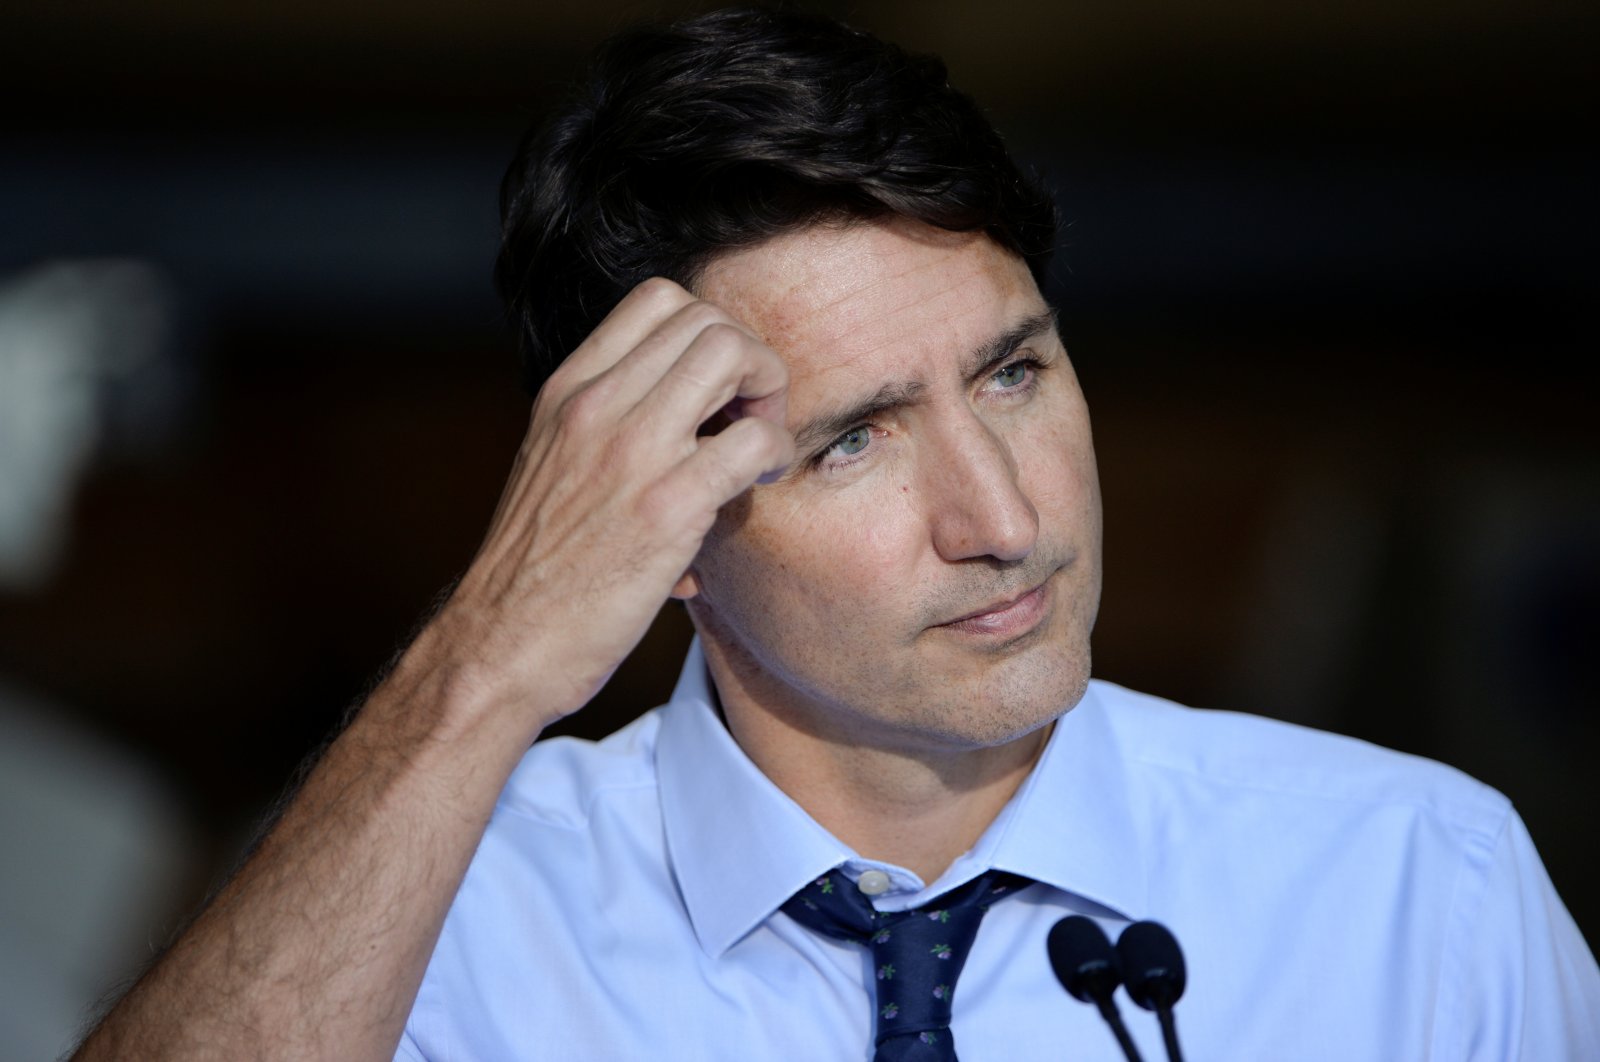 Canadian Prime Minister Justin Trudeau looks on during a news conference after visiting ETI Converting Equipment during his election campaign tour in Longueuil, Quebec, Canada, Aug. 16, 2021. (Reuters Photo)